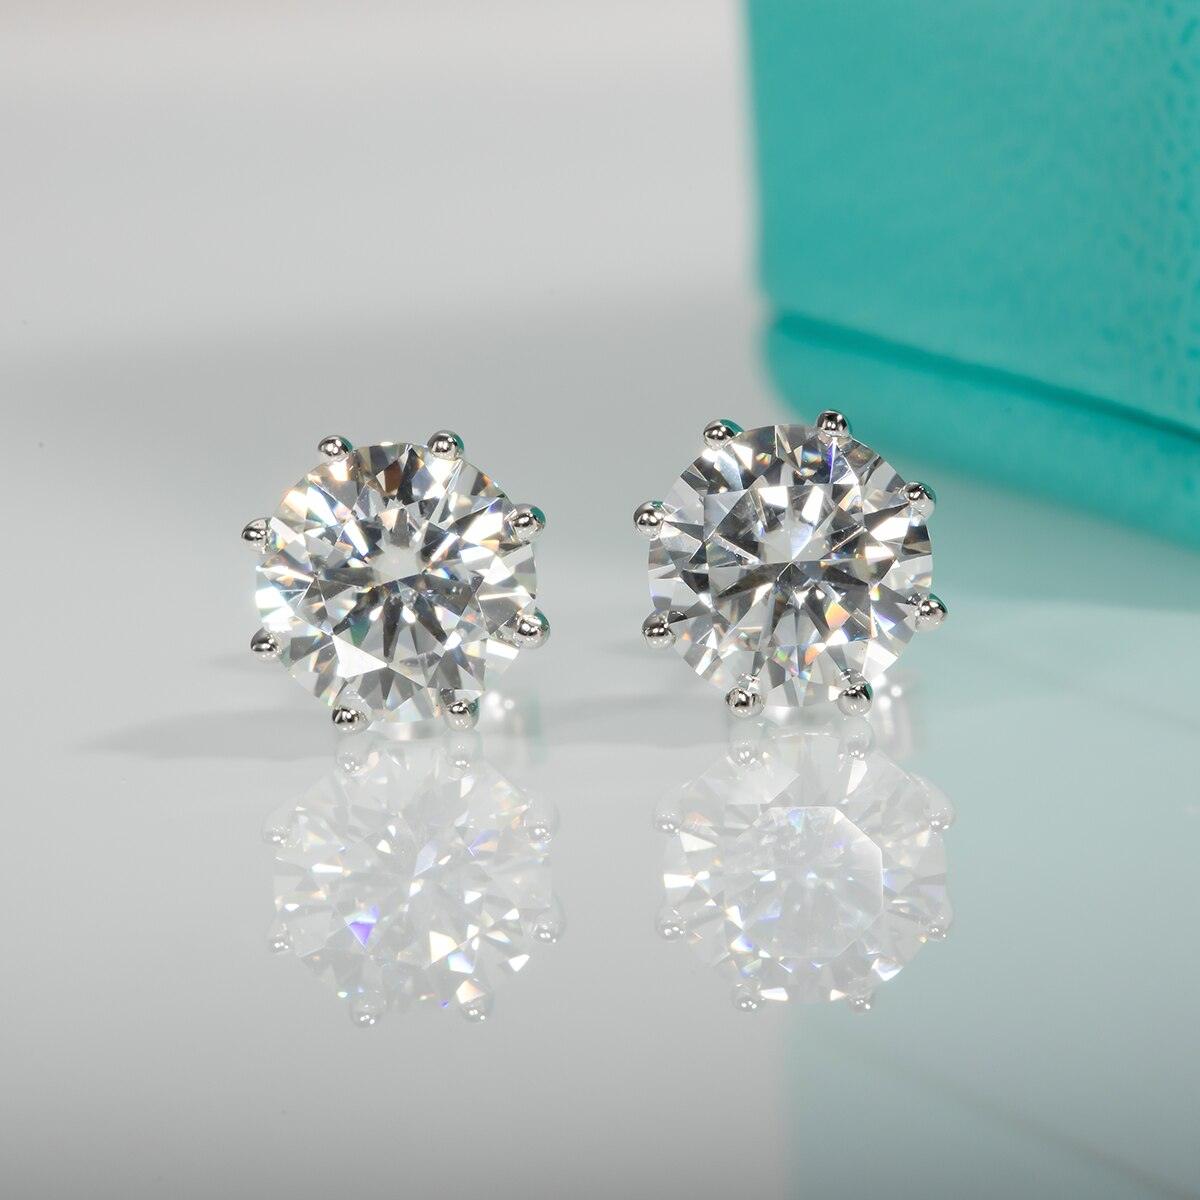 Excellent 2CT D Color VVS1 ♥︎ High Quality Moissanite Diamonds ♥︎ 8-Prong Stud Earrings - Fine Jewellery - The Jewellery Supermarket